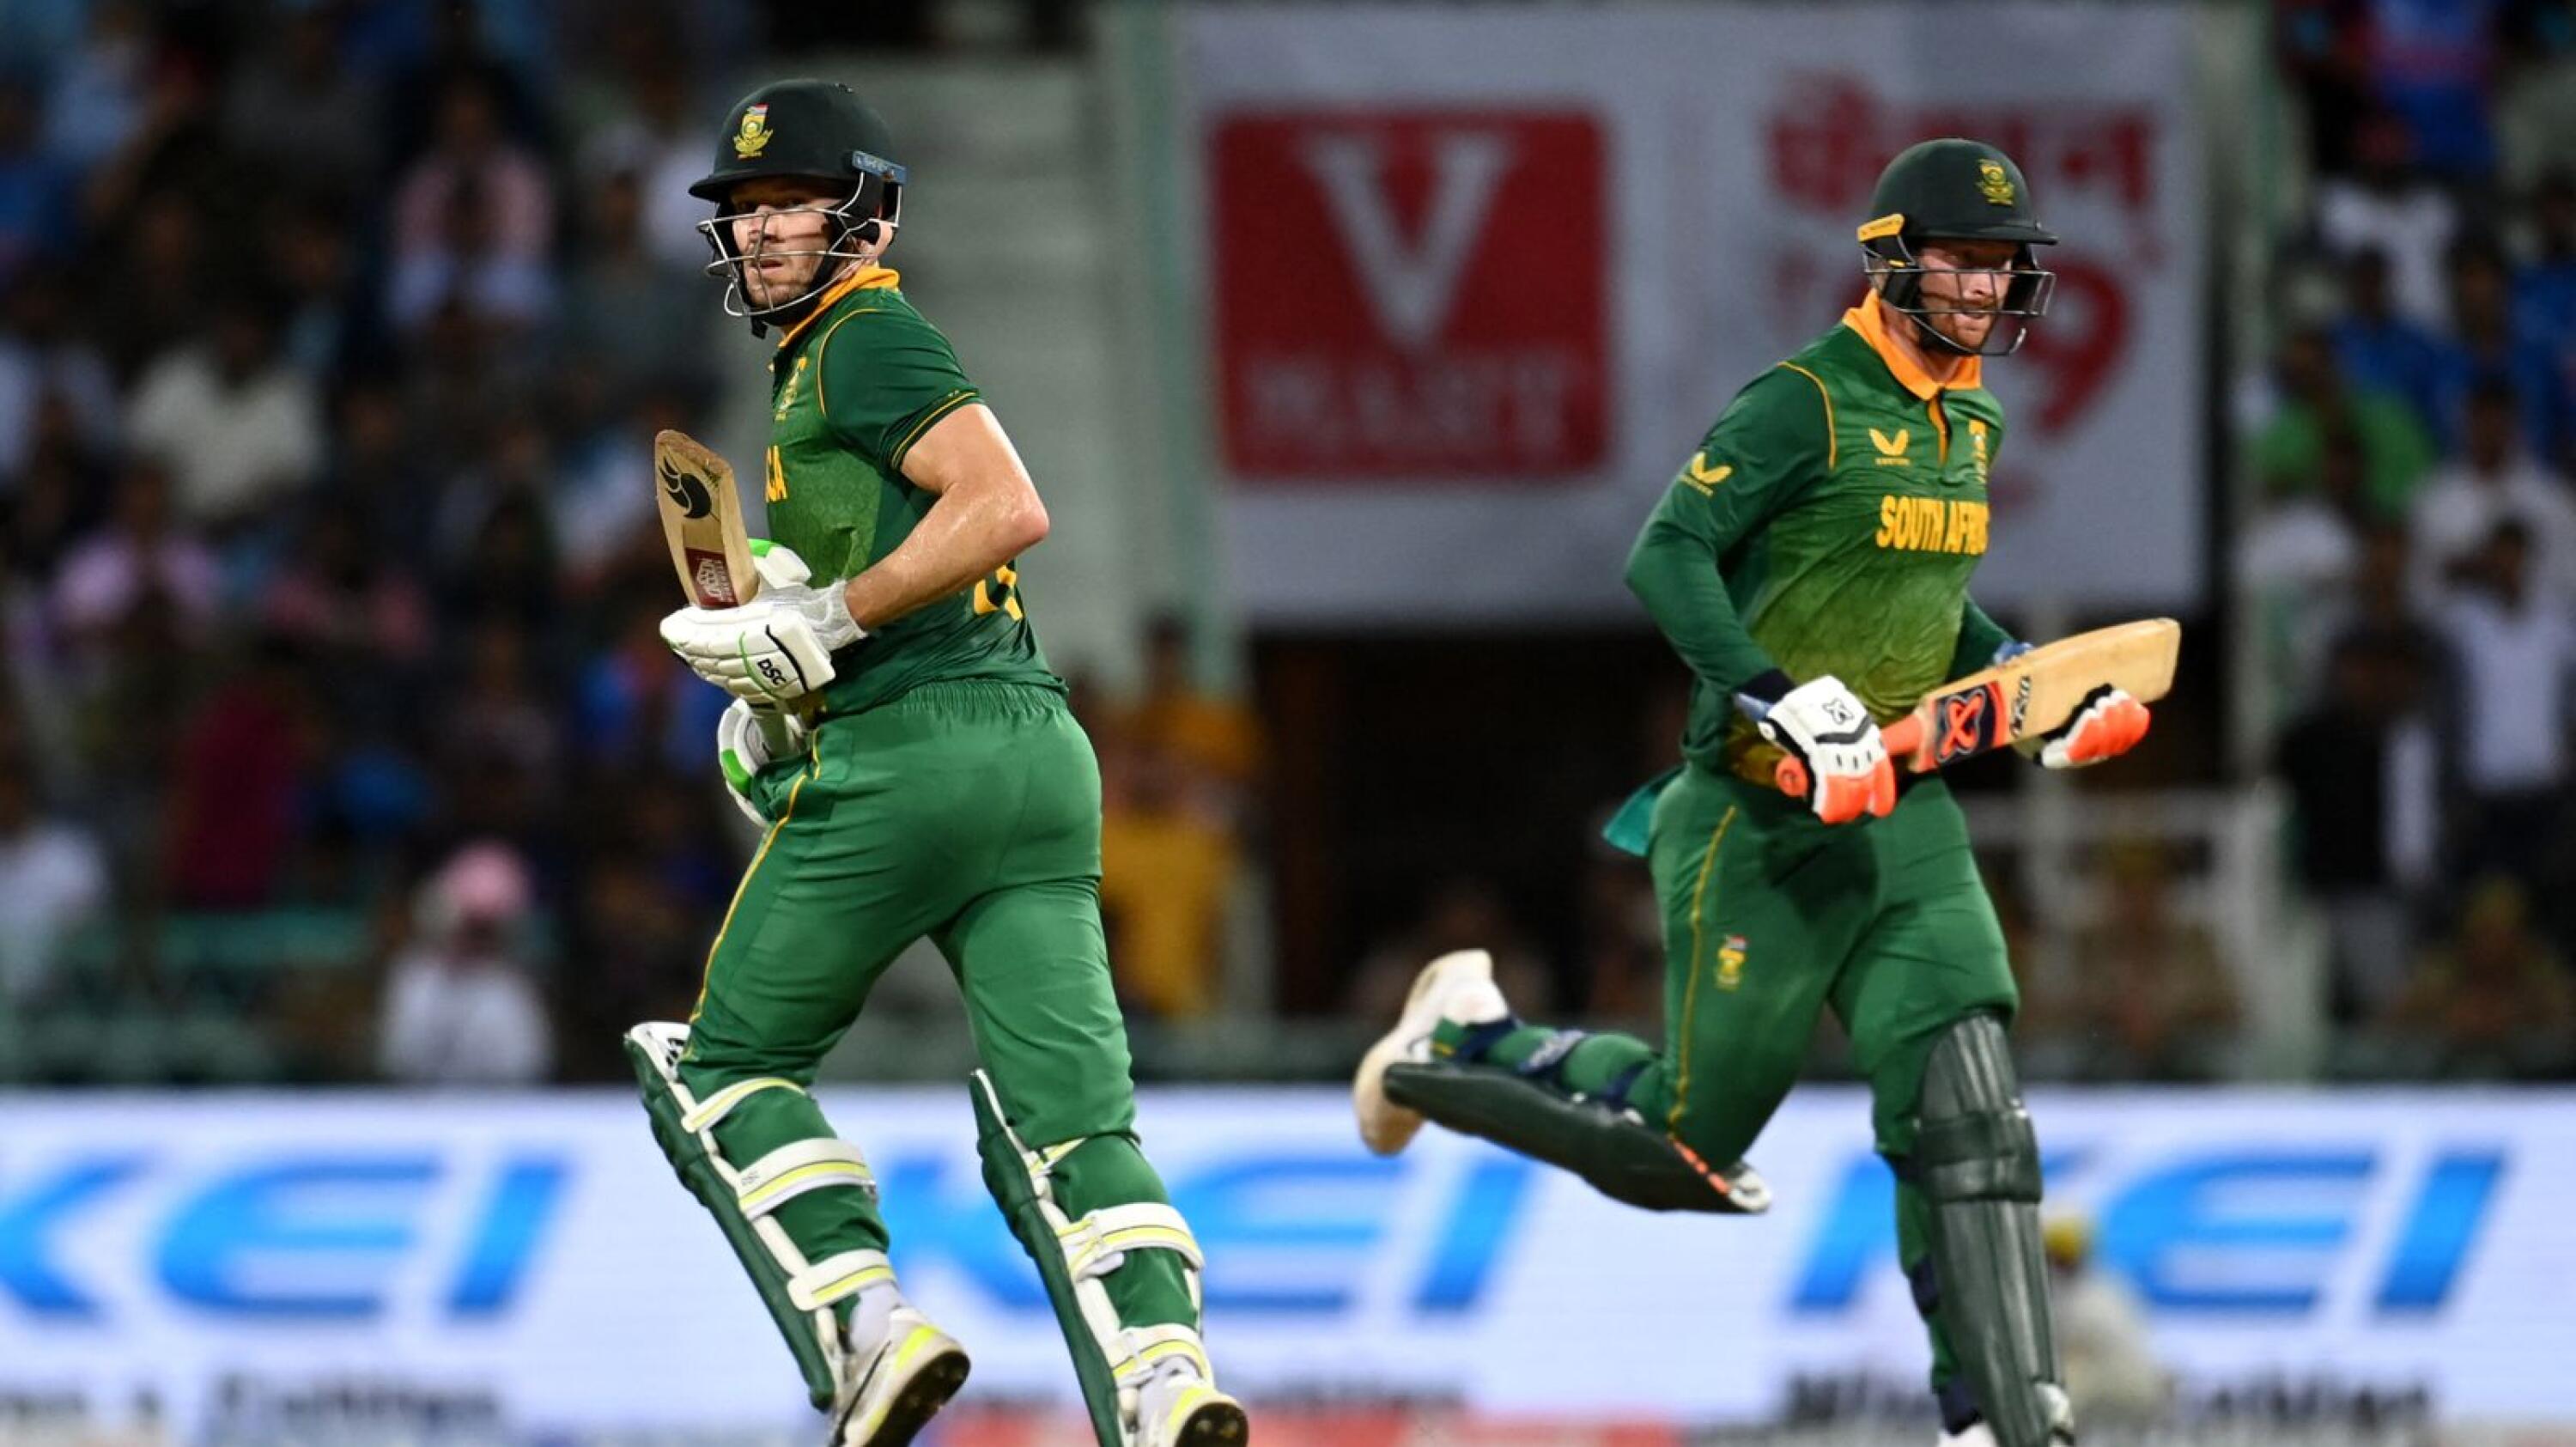 Heinrich Klaasen and David Miller powered SA to 249/4 through their 139-run partnership for the fifth wicket against India in the first ODI at the Ekana Cricket Stadium on Thursday.